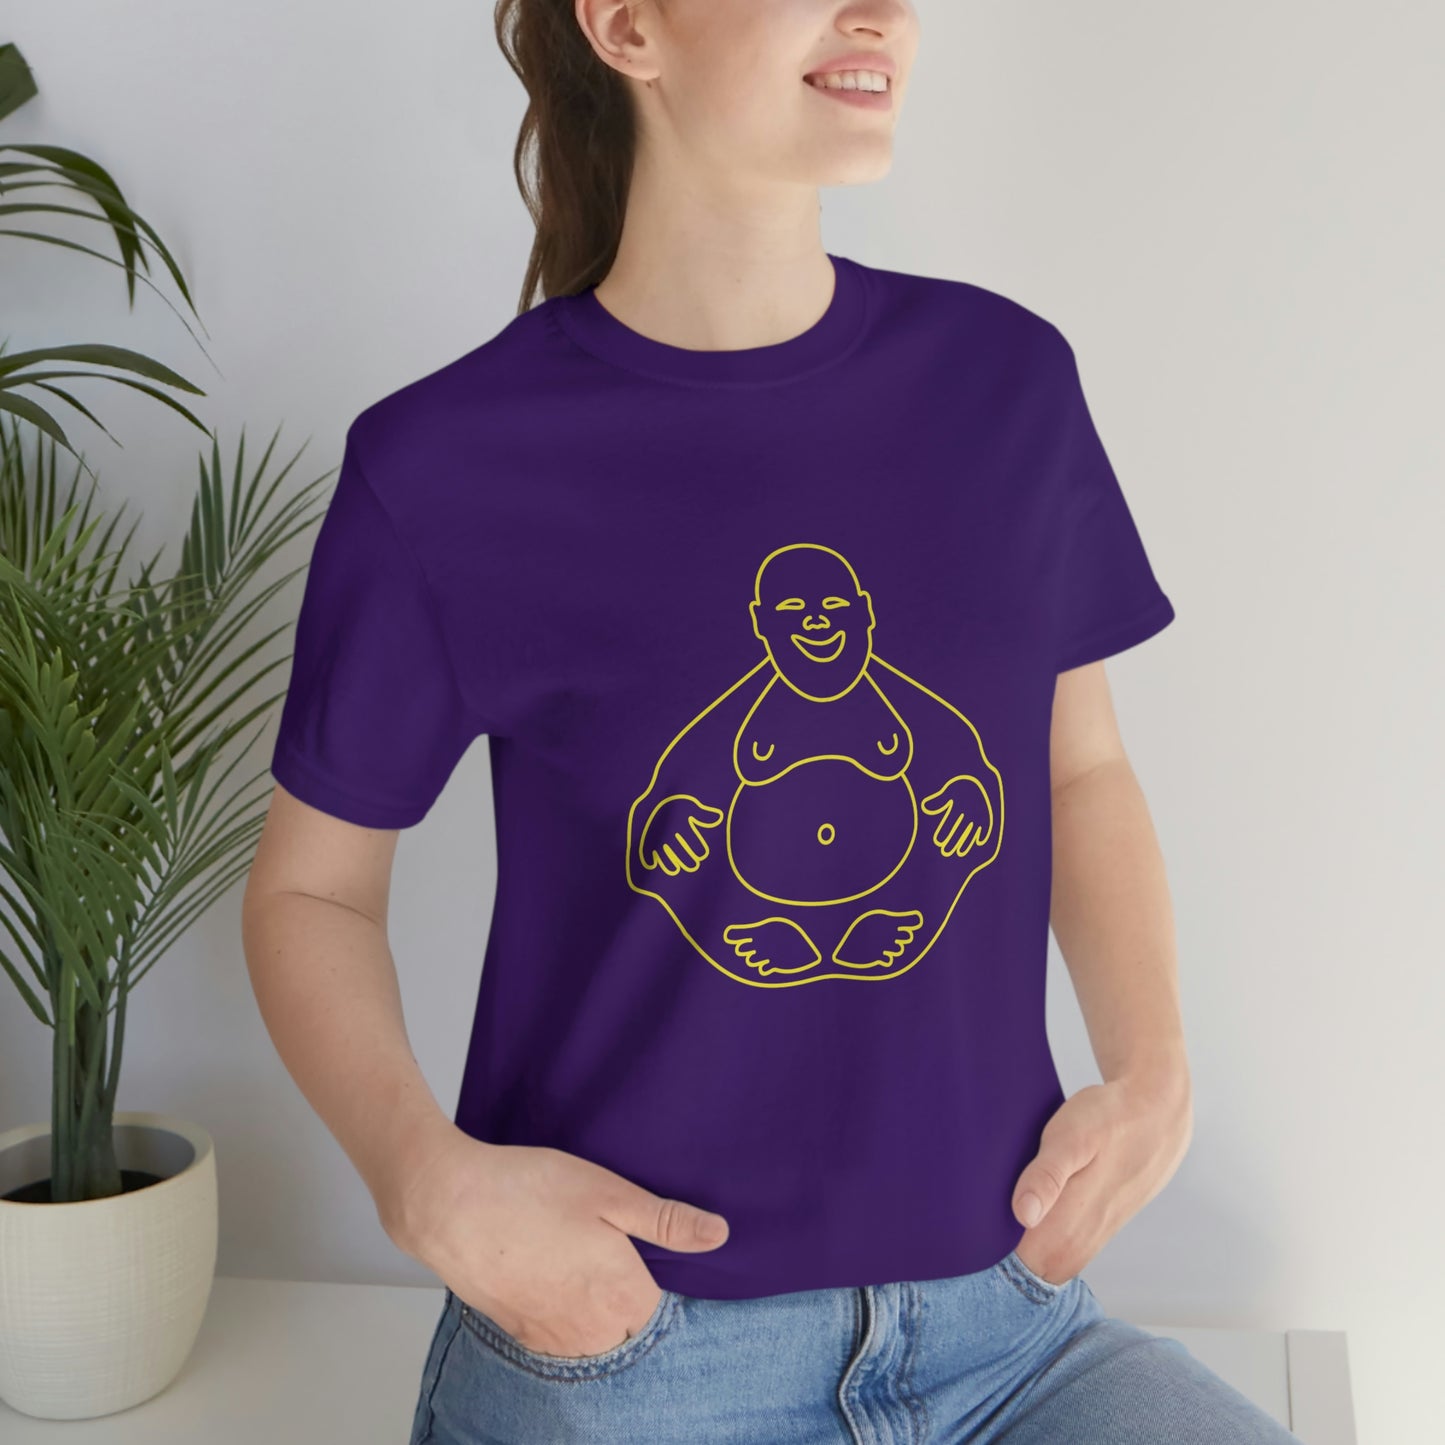 Purple T-Shirt featuring a yellow 'Laughing Buddha' design from the TEQNEON Ha Ha Land collection, exuding joy and humour